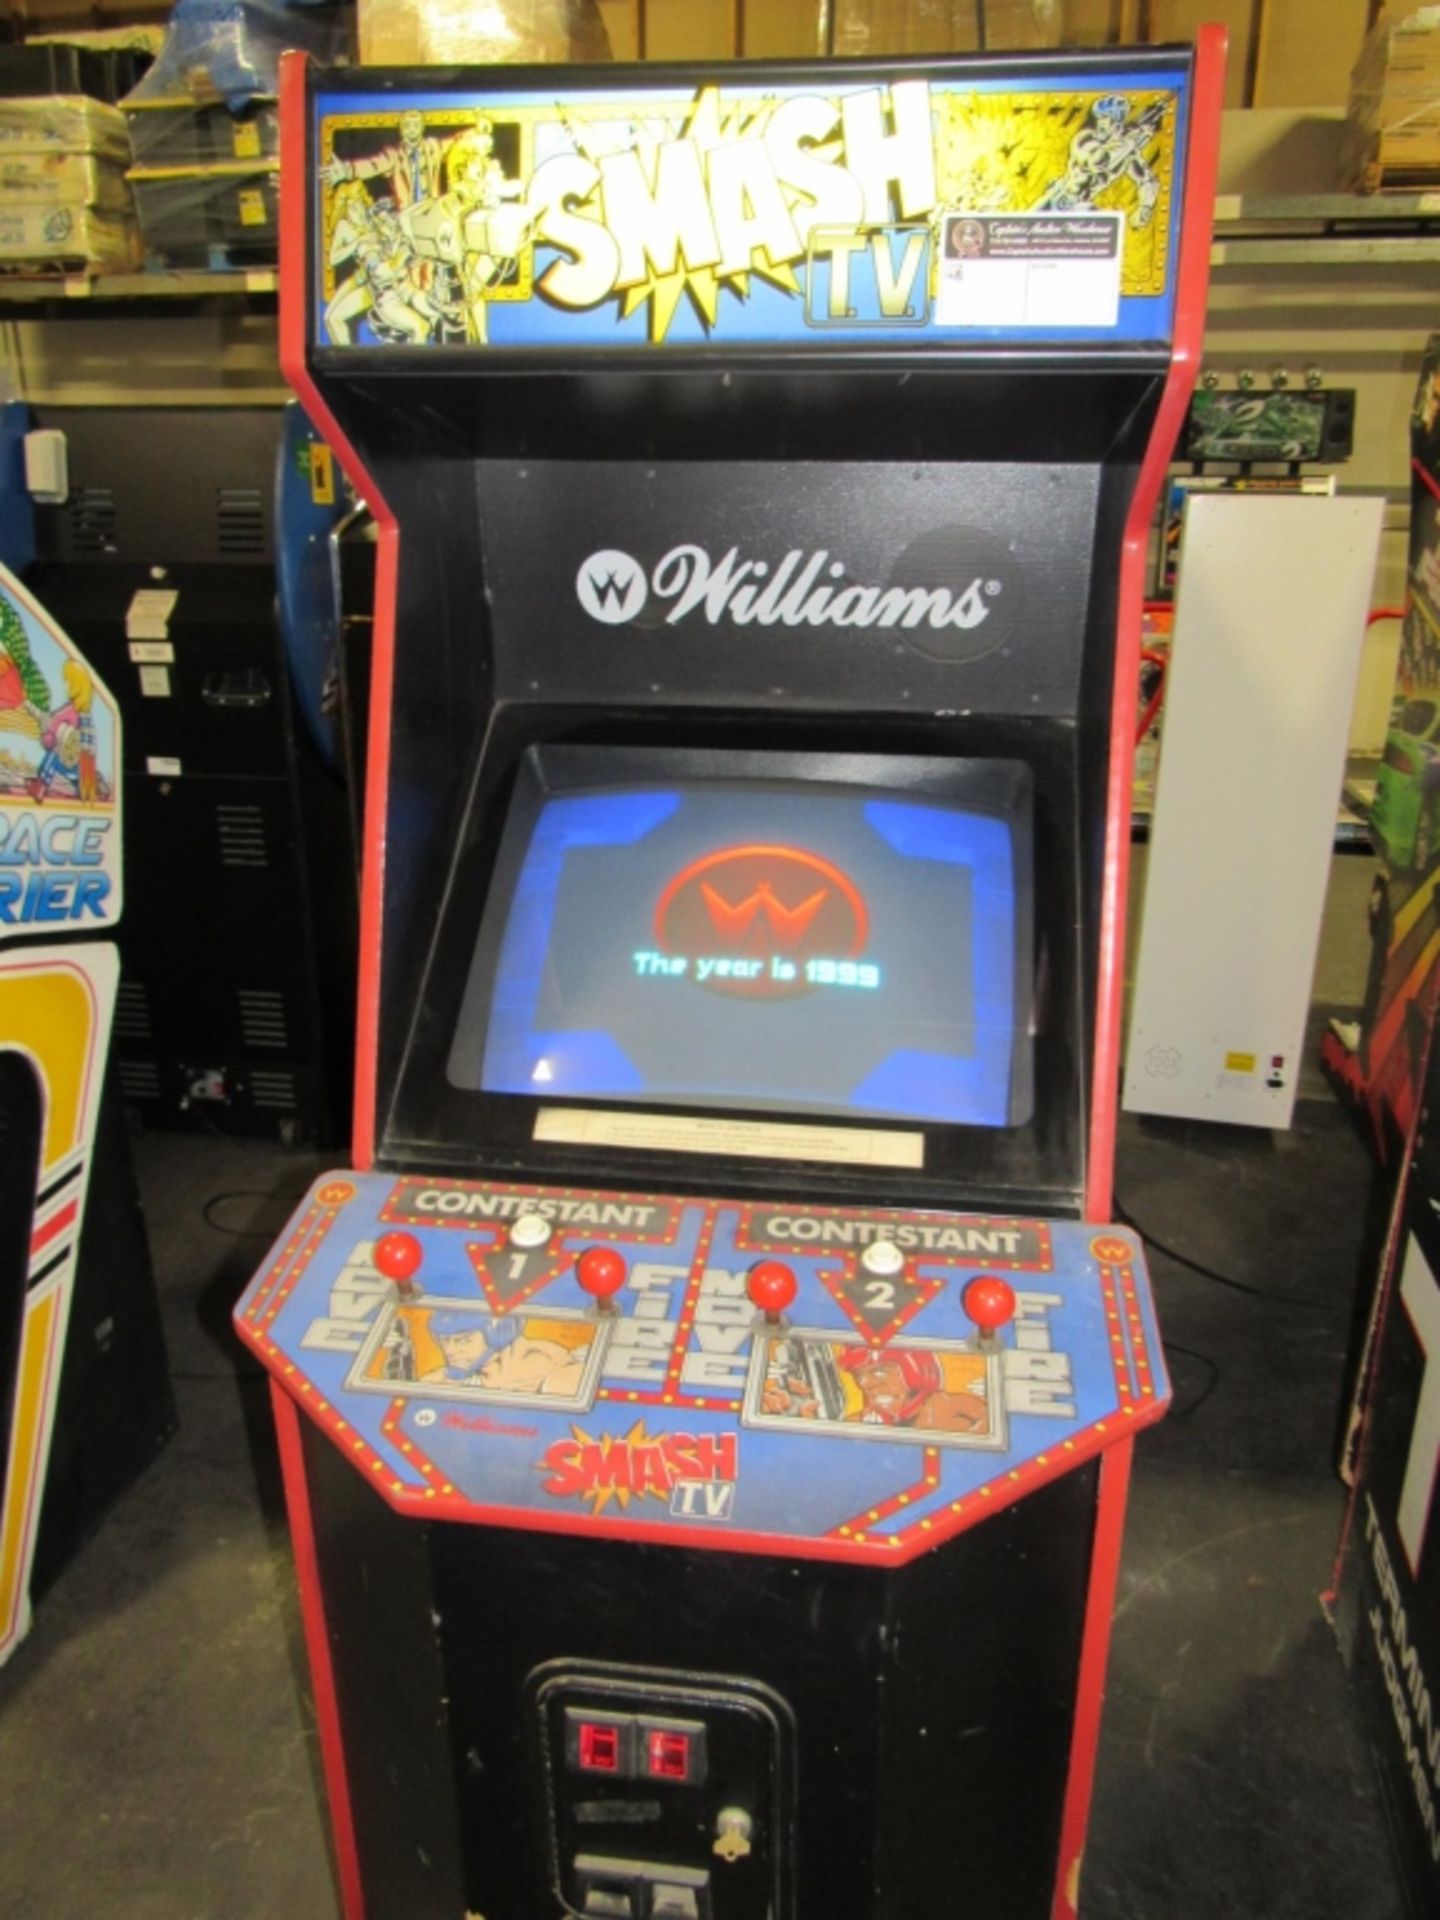 SMASH TV MIDWAY CLASSIC UPRIGHT ARCADE GAME - Image 2 of 4